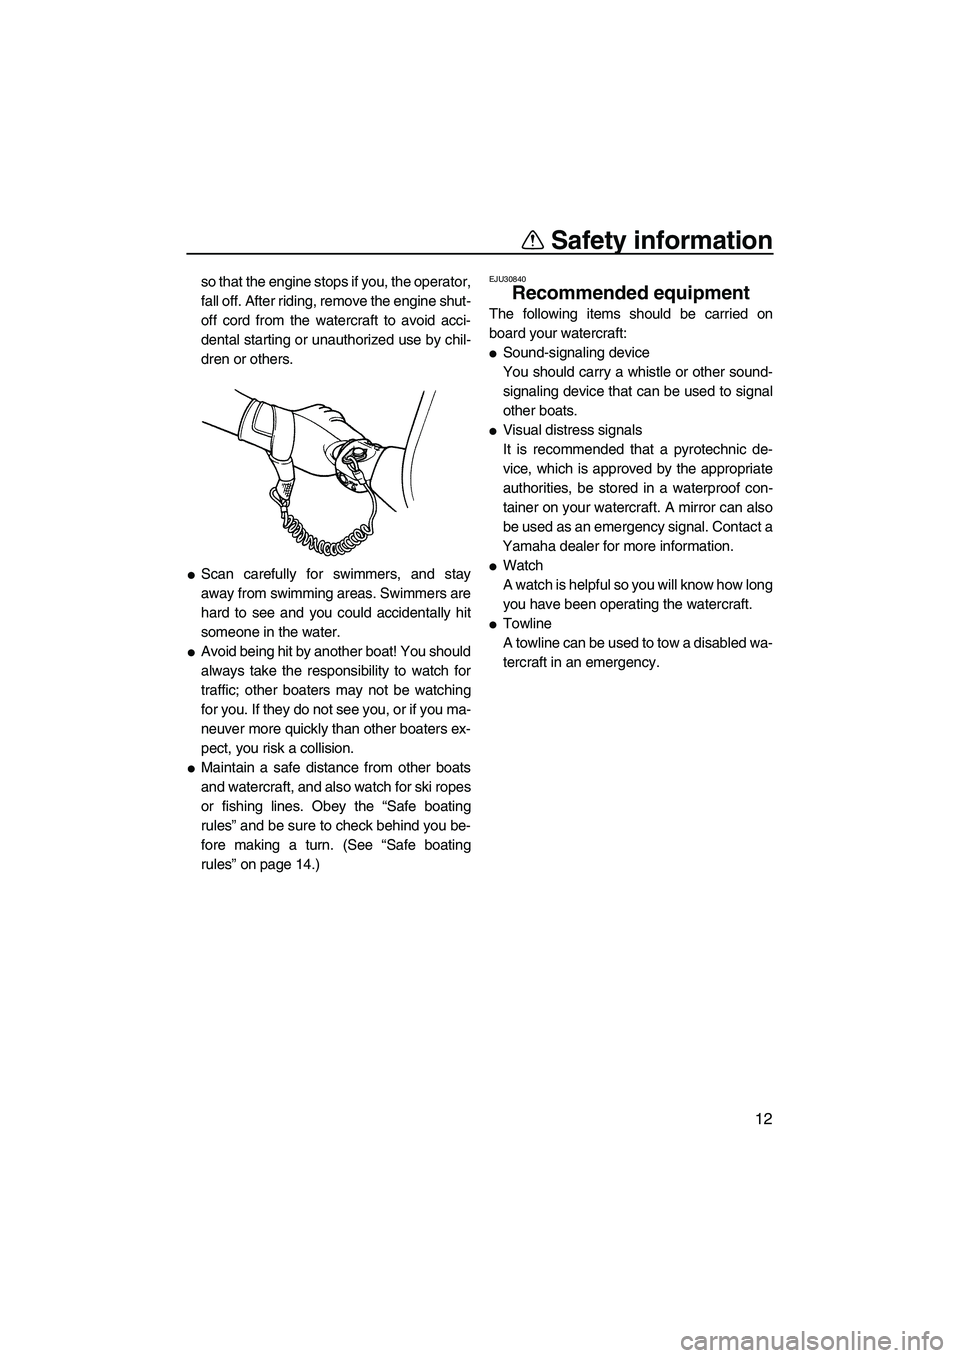 YAMAHA SUPERJET 2007  Owners Manual Safety information
12
so that the engine stops if you, the operator,
fall off. After riding, remove the engine shut-
off cord from the watercraft to avoid acci-
dental starting or unauthorized use by 